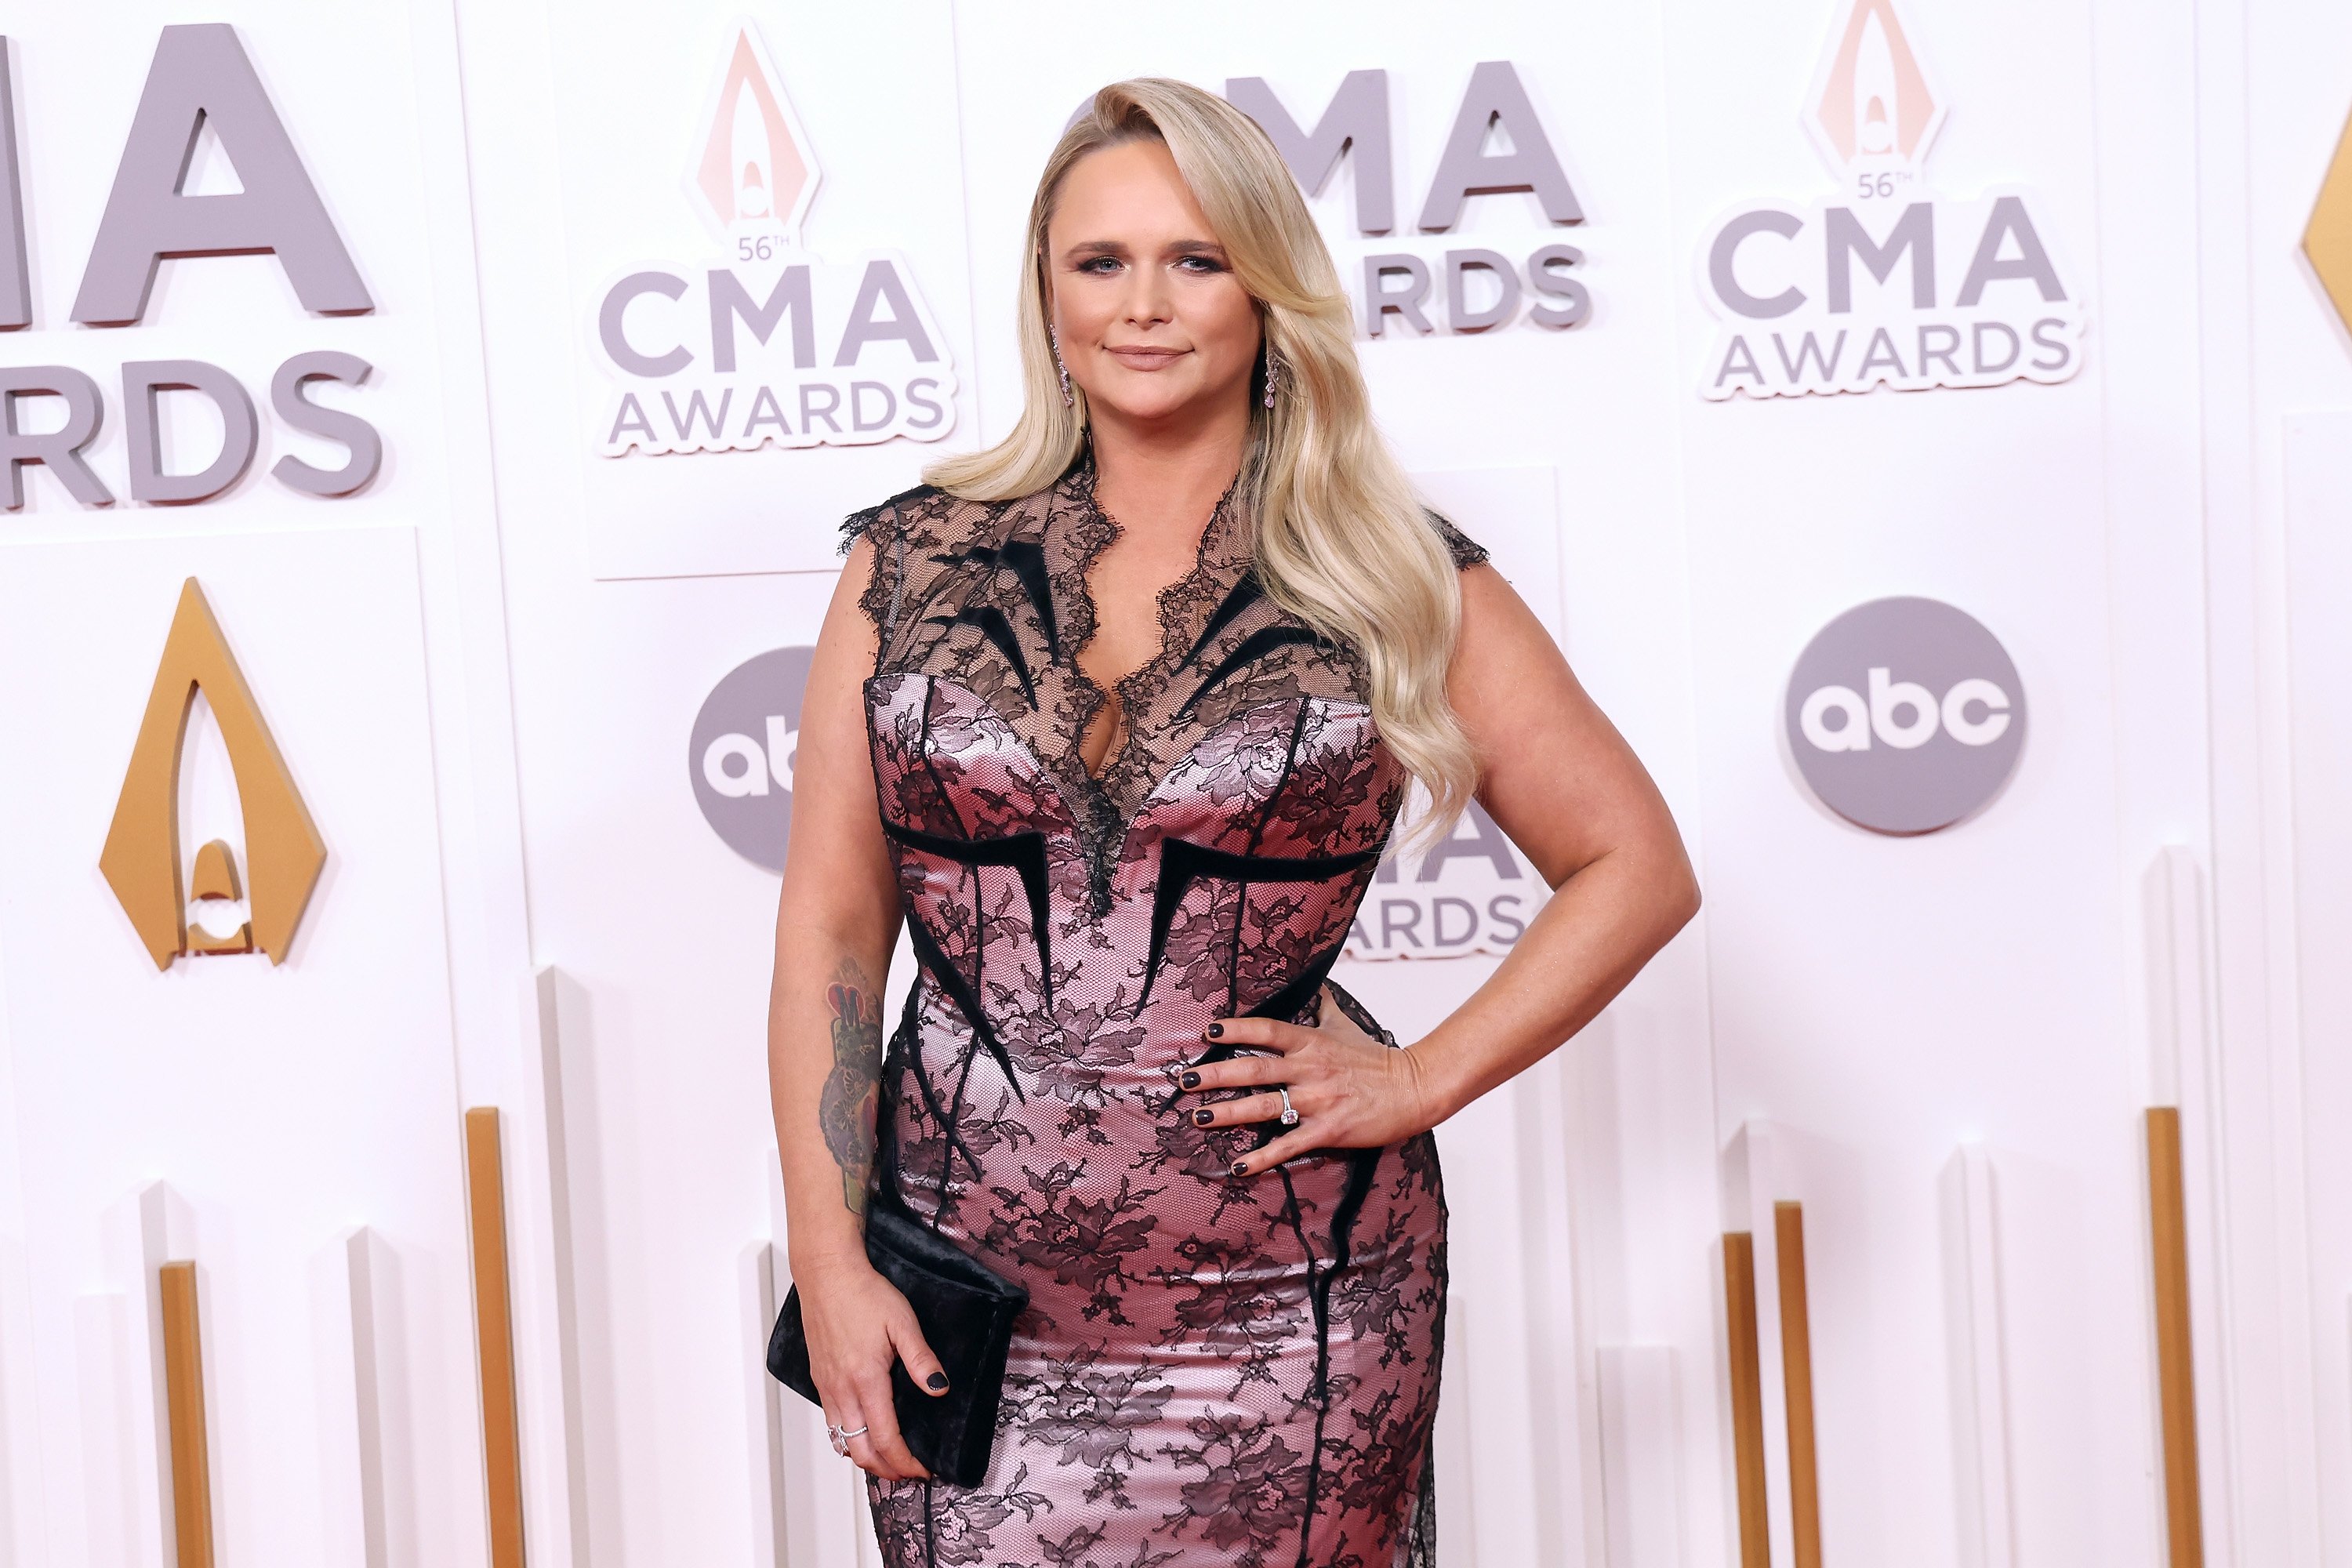 Miranda Lambert at the 56th Annual CMA Awards on November 9, 2022, in Nashville, Tennessee | Source: Getty Images